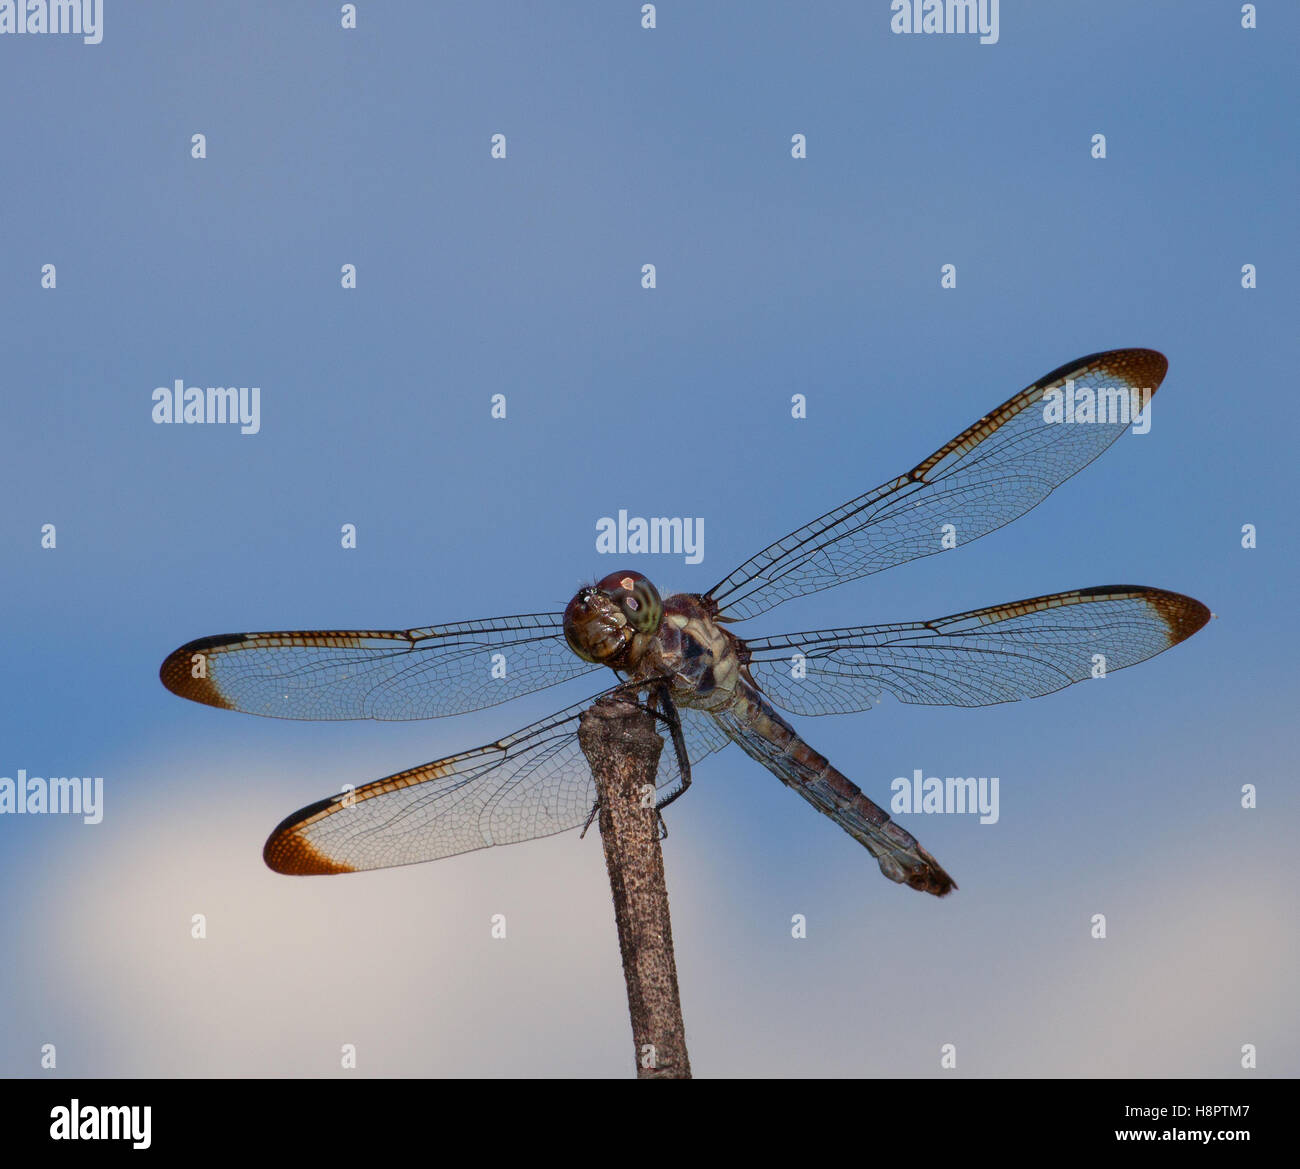 Green eyed dragonfly on a stick with sky behind Stock Photo